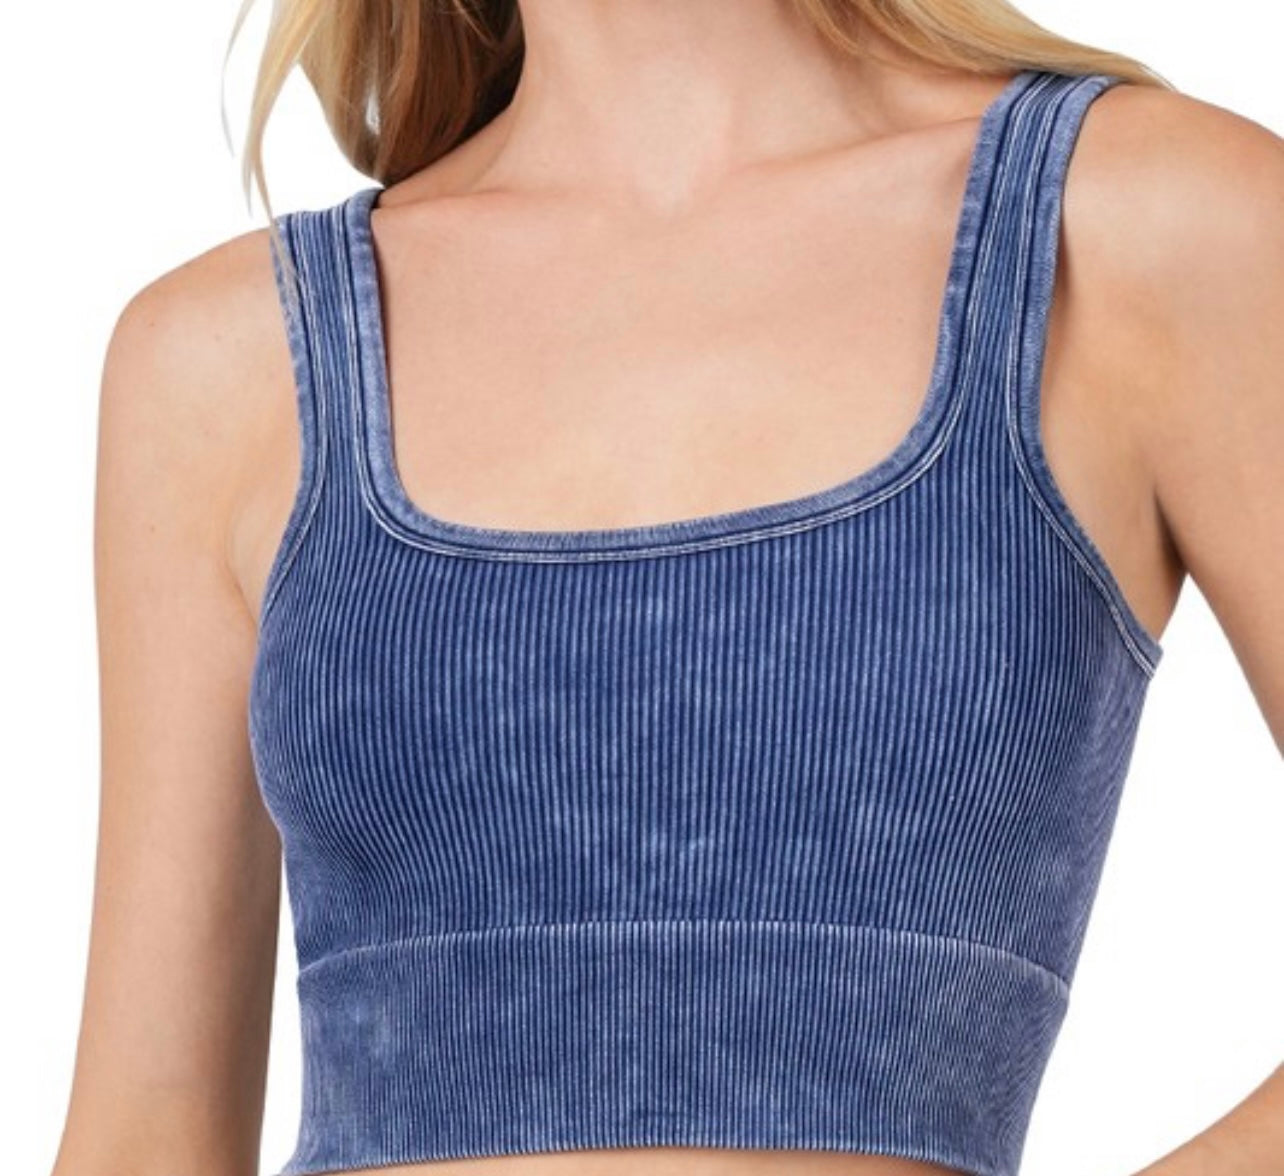 Washed navy cami top